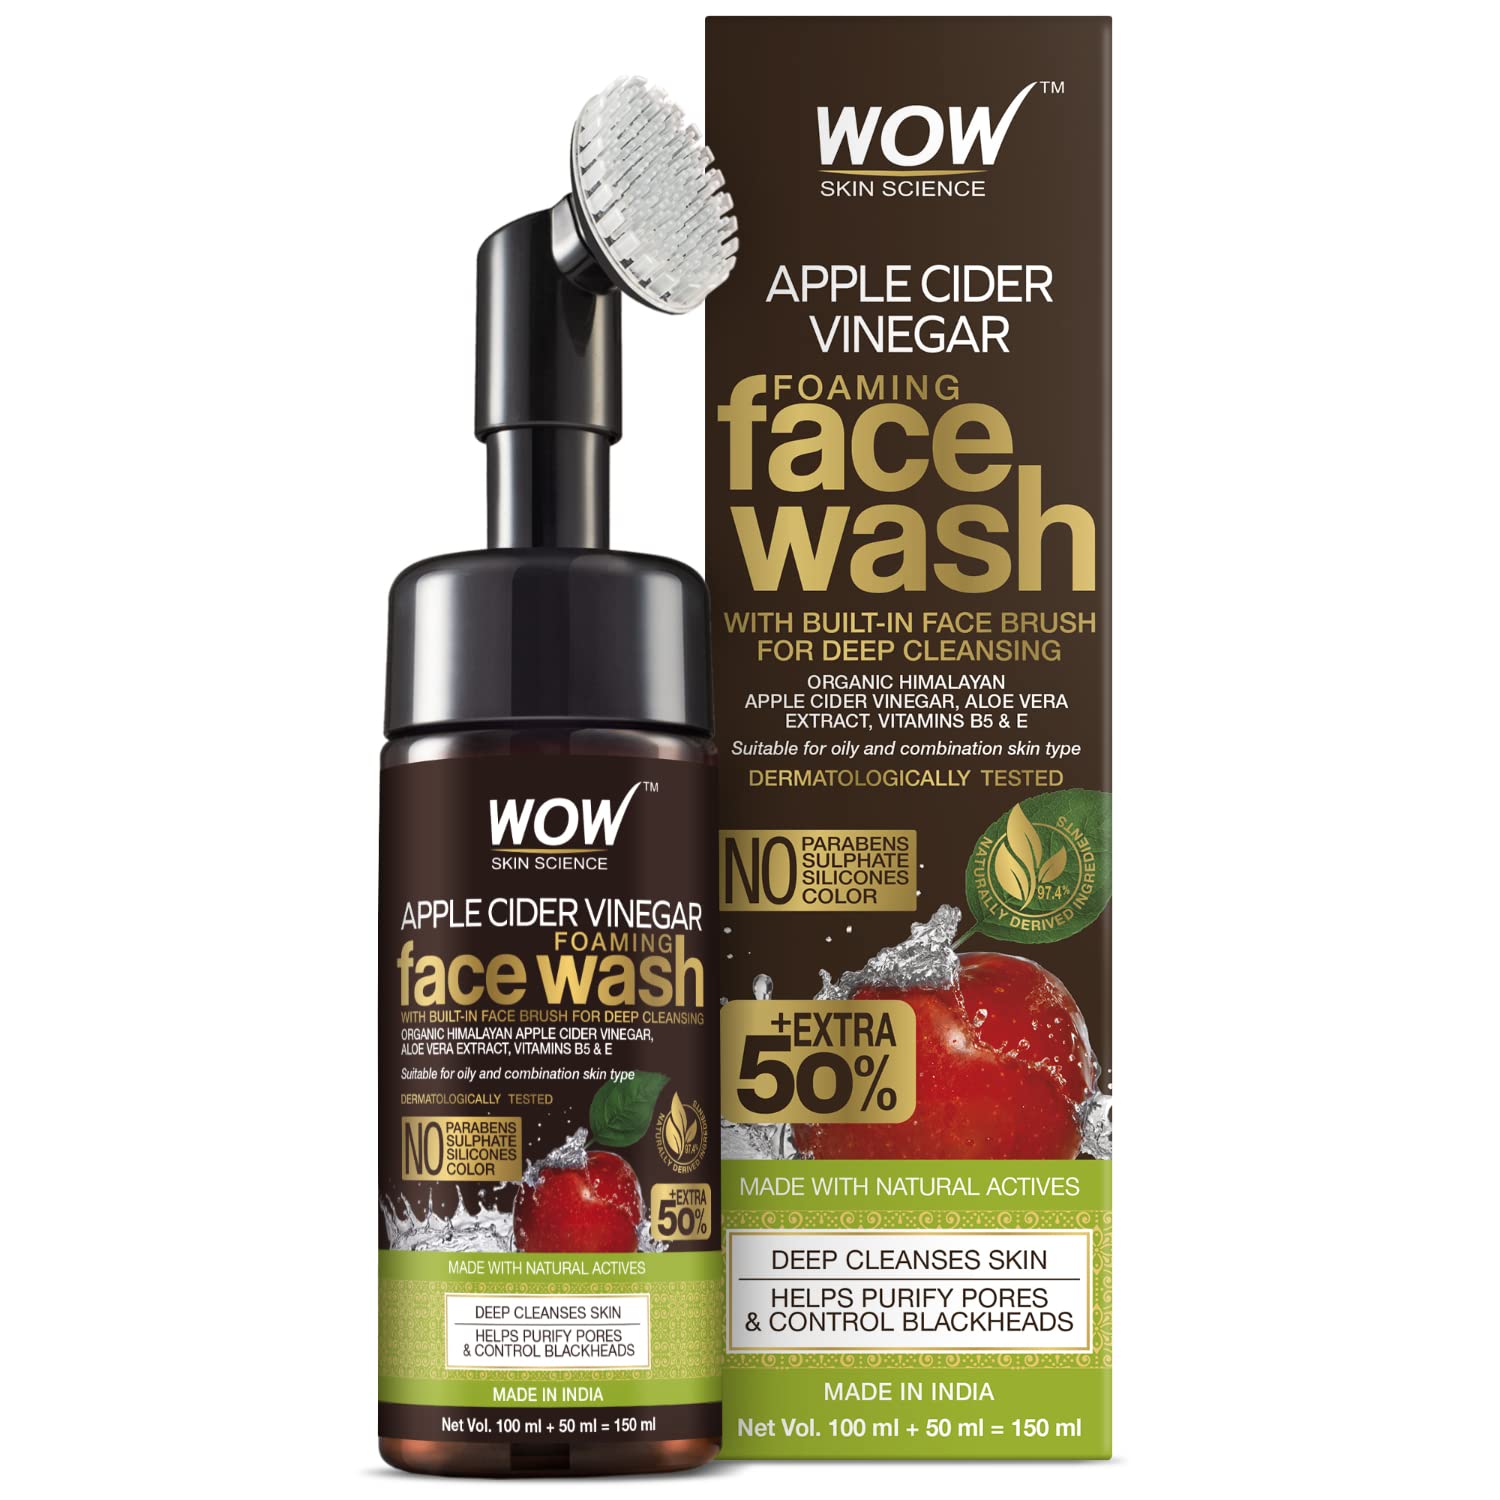 WOW Skin Science Foaming Face Wash